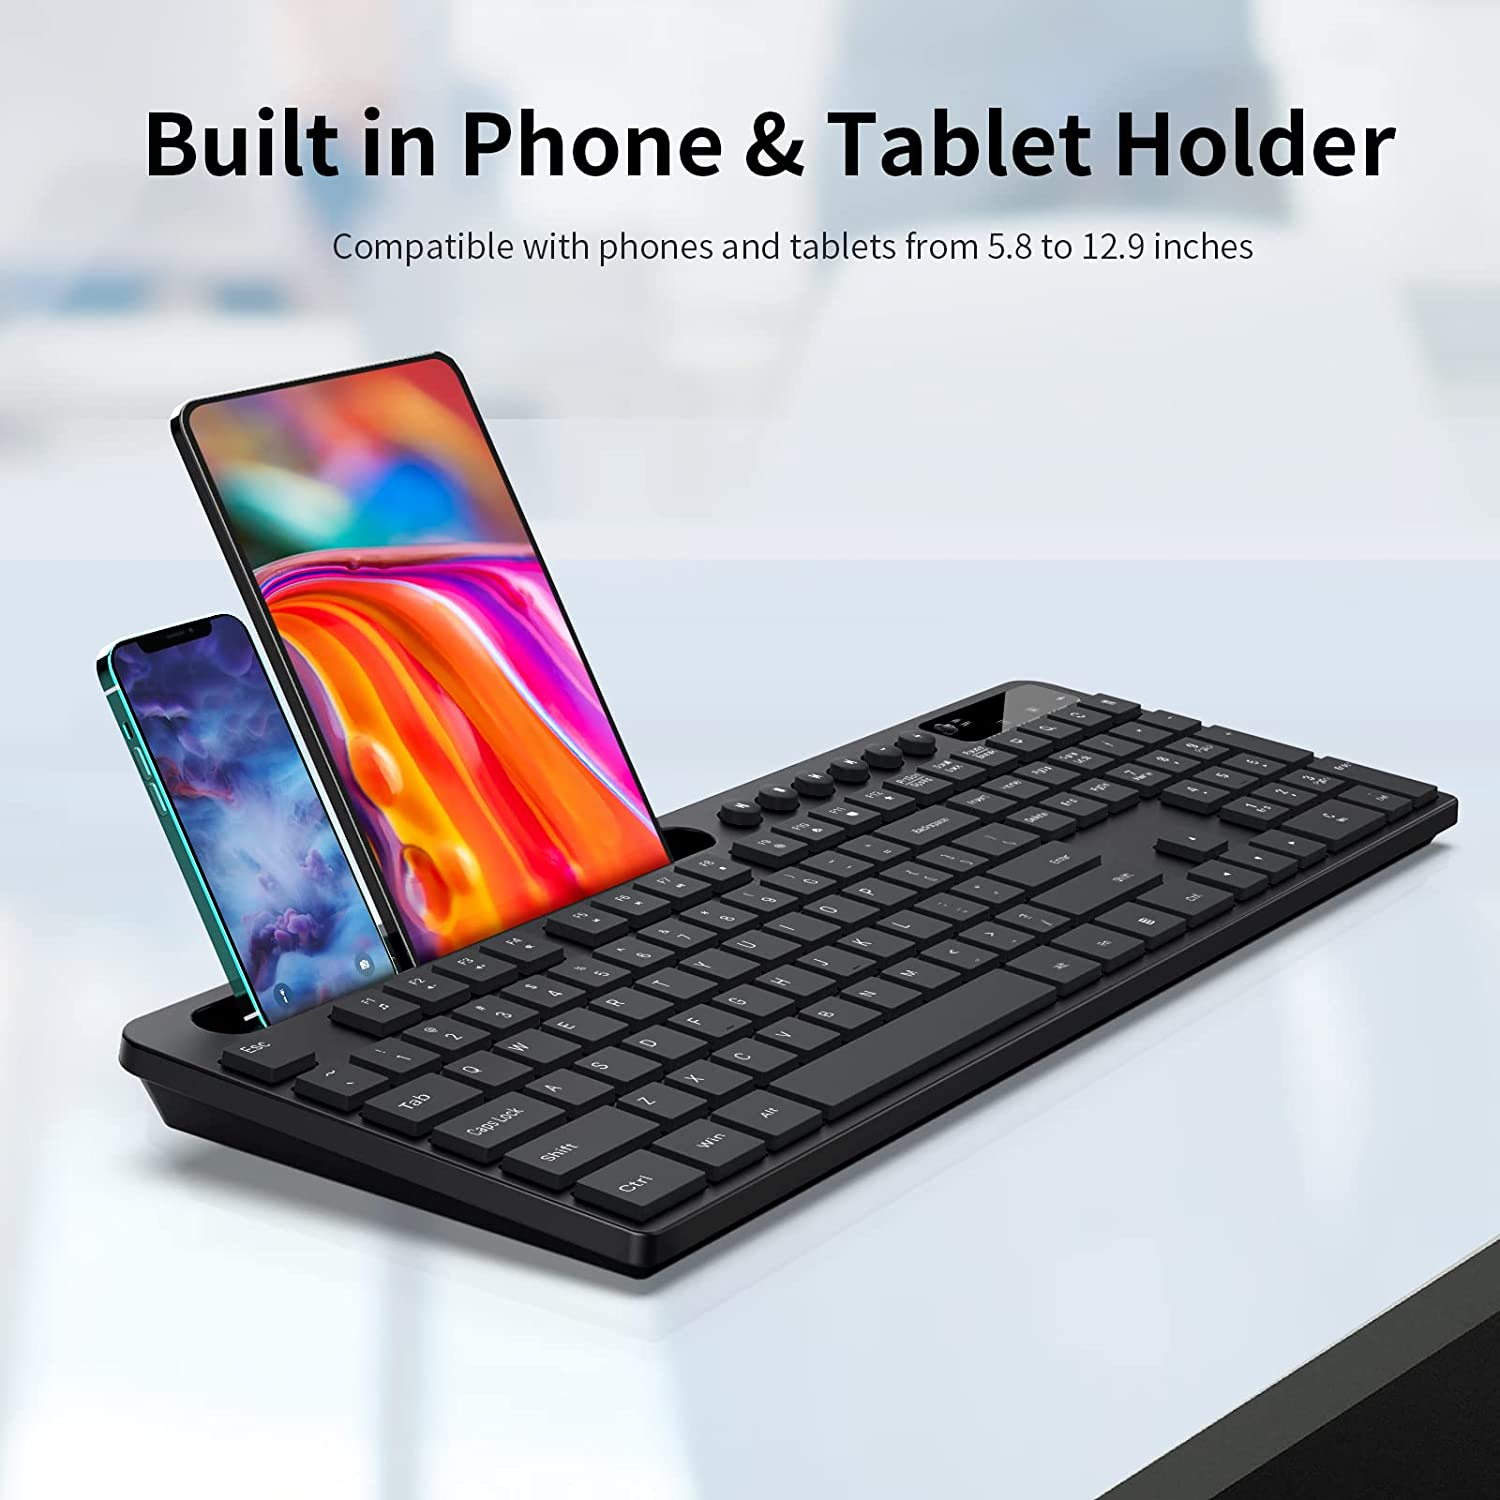 Wireless Keyboard and Mouse Combo with Phone Tablet Holder, 2.4G Ergonomic Wireless Computer Keyboard, Silent Mouse with 6 Button, Compatible with Macbook, Windows